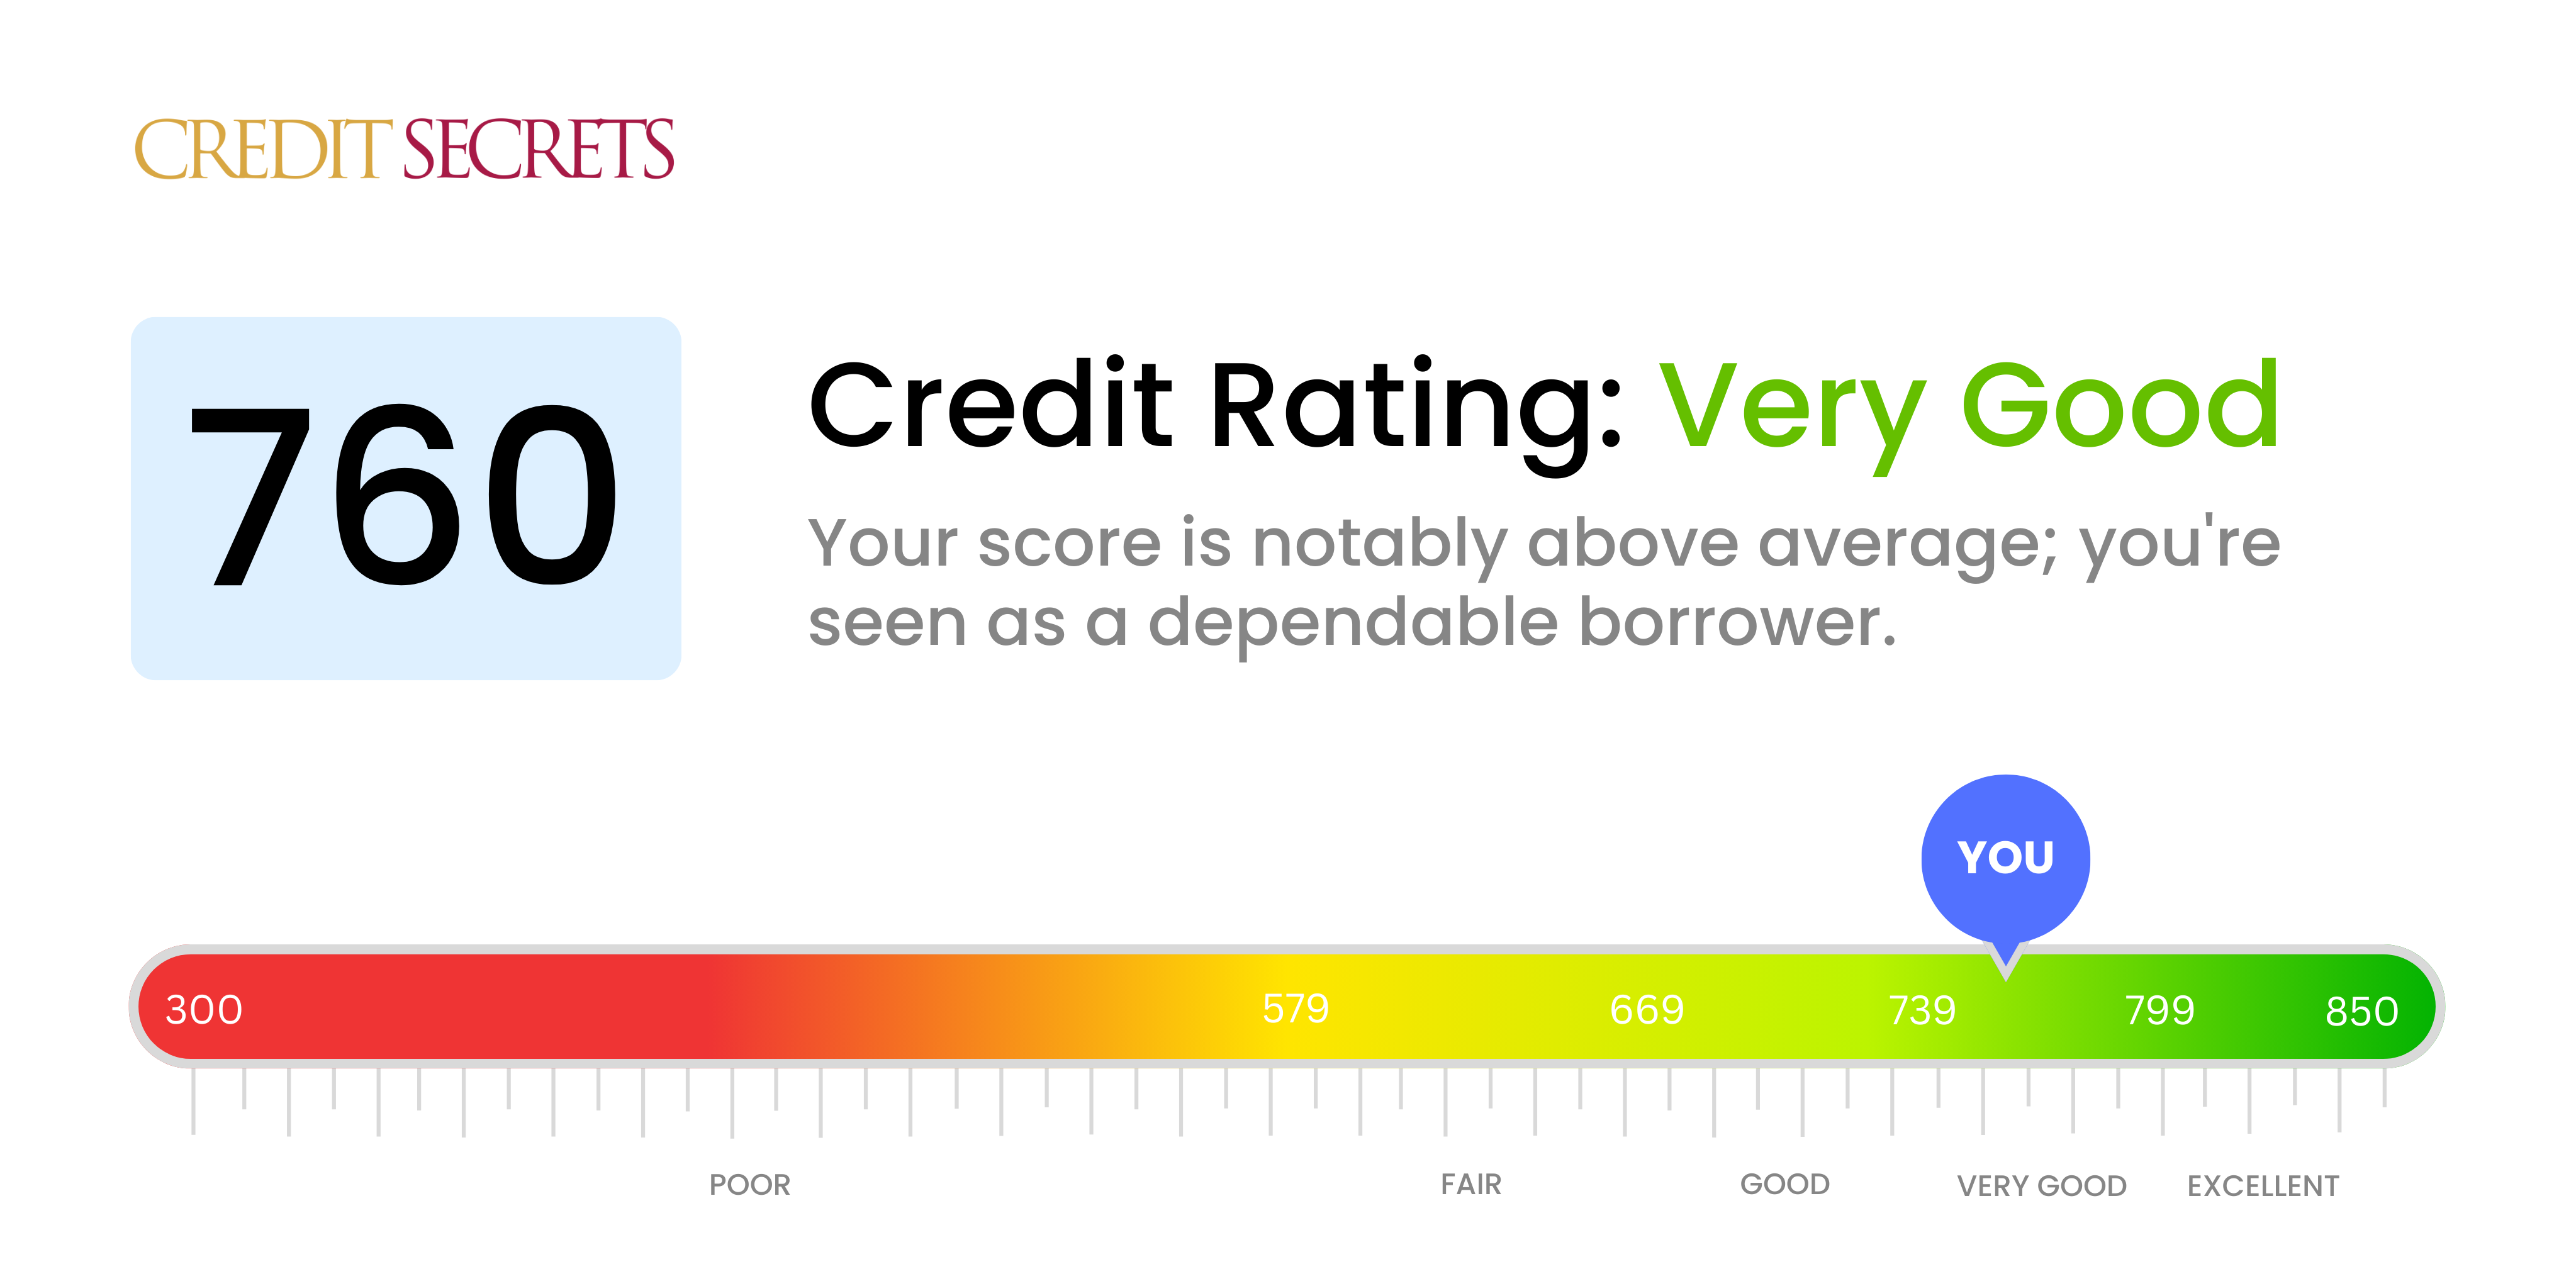 Is 760 a good credit score?